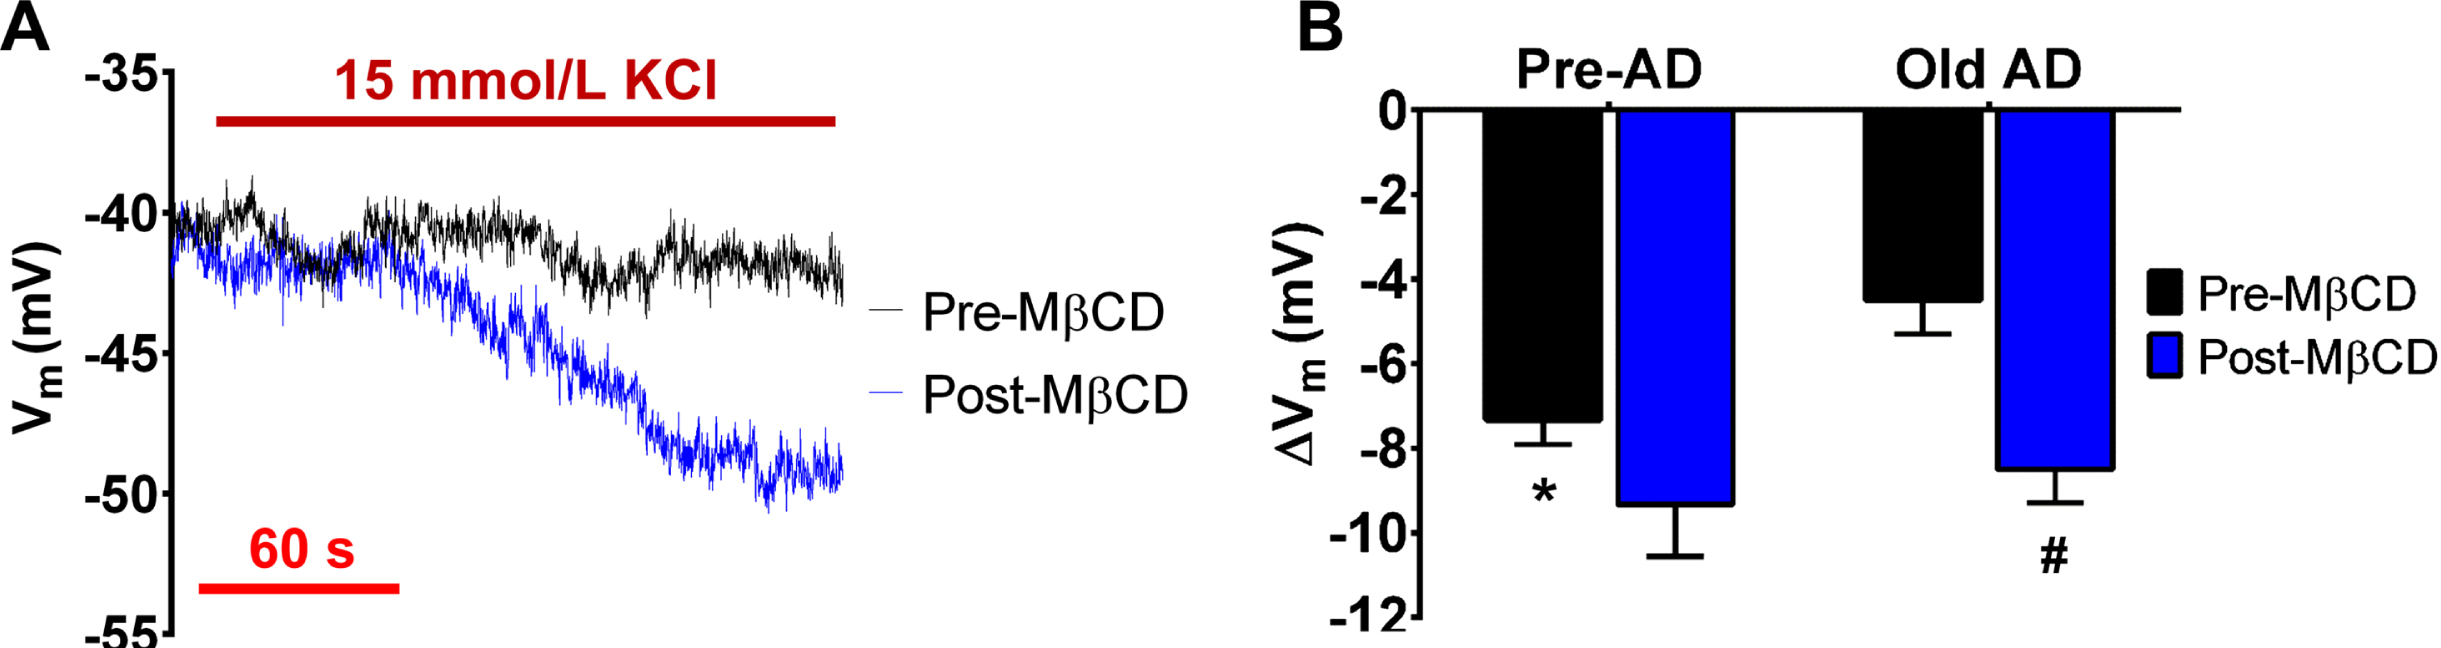 Reduction of membrane cholesterol restores endothelial KIR2 channel function during AD pathology. A) Representative recordings of KIR2 channel-mediated hyperpolarization in Old AD females in response to 15 mM KCl before and after 30 min washout of MβCD (1 mmol/L, 20 min). B) Summary data for peak ΔVm in response to KIR2 channel activation in Pre-AD versus Old AD females before and after MβCD treatment (30 min washout). Note that both Pre-AD and Old AD females show similar hyperpolarization to 15 mM KCl as ∼9 mV following MβCD treatment. n = number of animals and respective cerebral endothelial tubes (Pre-AD: 9; Old AD: 12). *p < 0.05 (unpaired t-test) for Old AD Female Pre-MβCD versus Pre-AD Female Pre-MβCD; #p < 0.05 (two-way ANOVA & paired t-test), Old AD female Post-MβCD versus Old AD female Pre-MβCD.